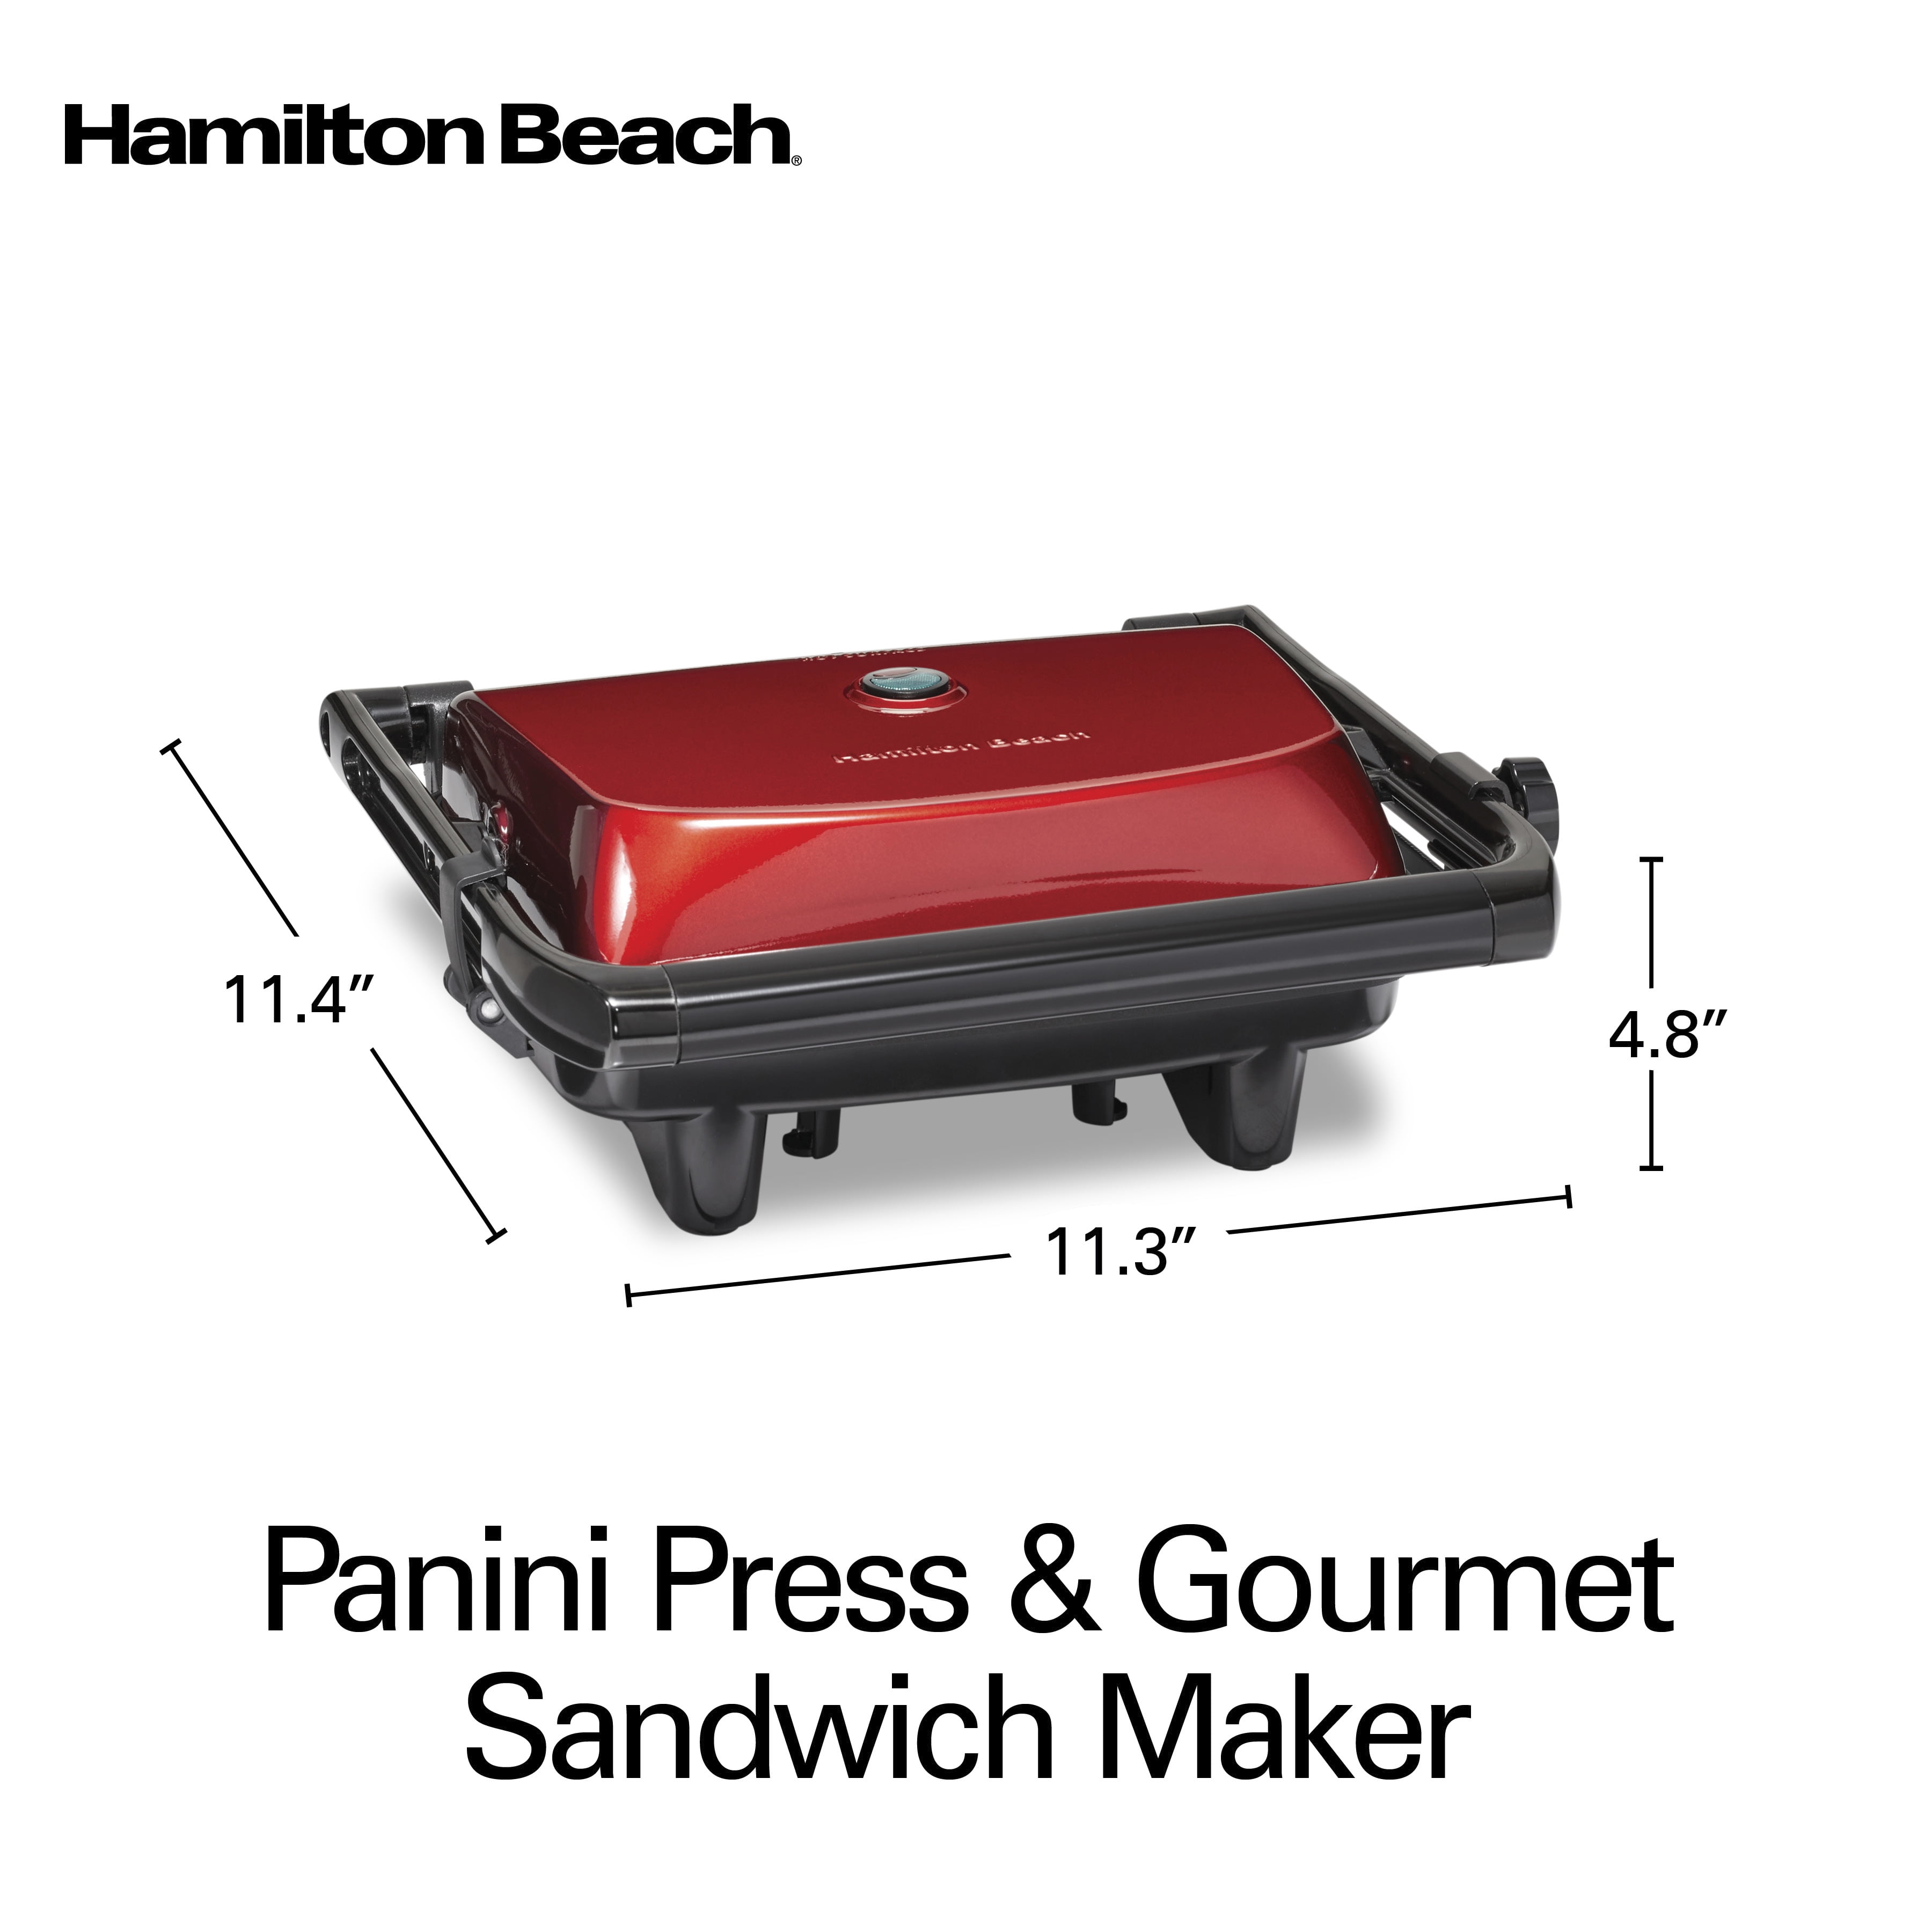 Ace Hardware and Home Centre Maldives - You can order this from our website  -   Hamilton Beach - Panini Press and Indoor Grill Sandwich Maker Pile bread up  with your favourite